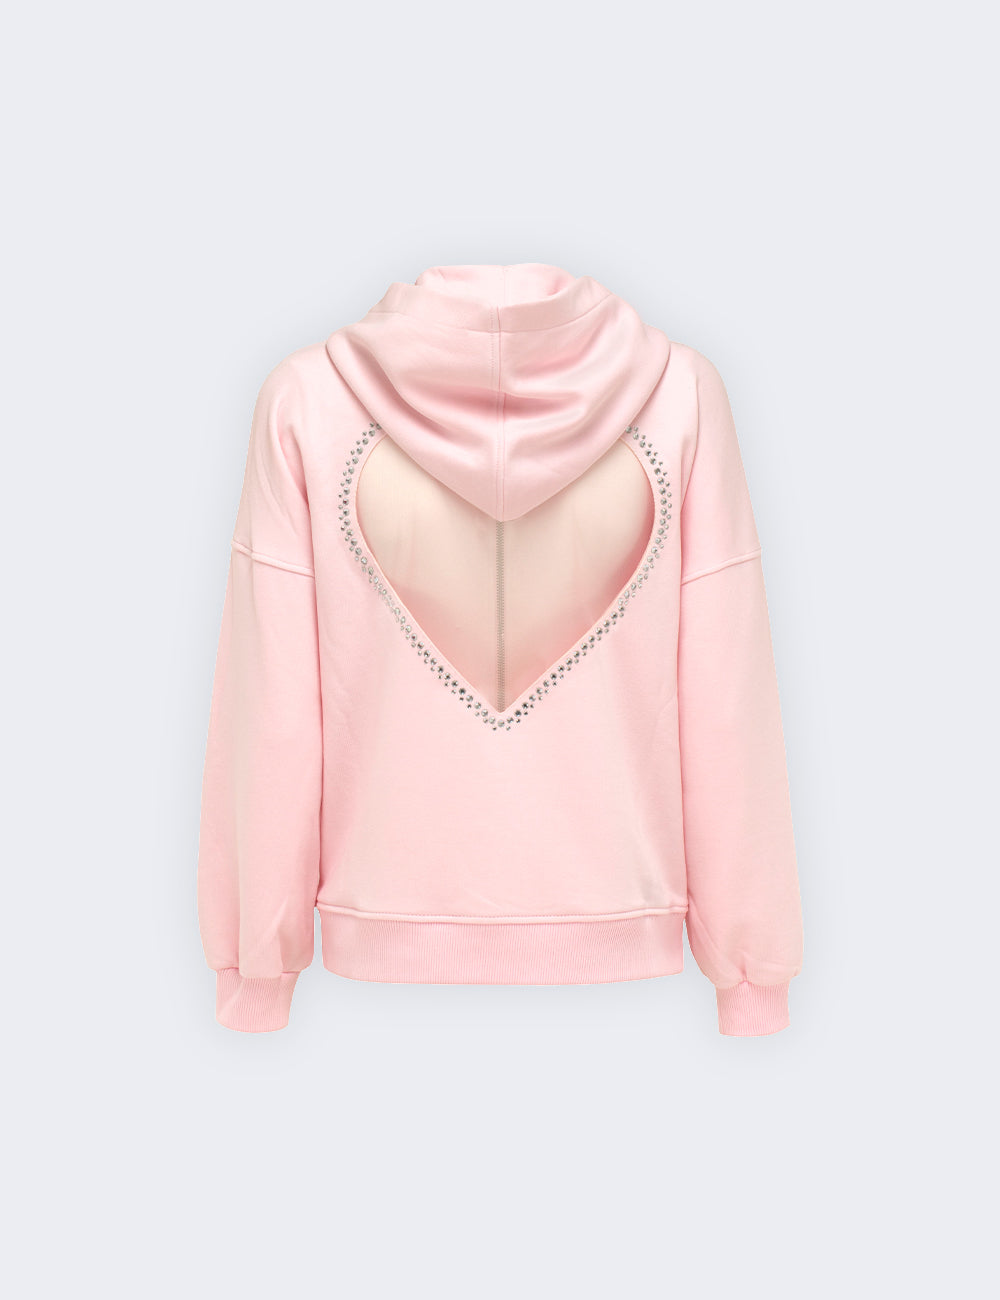 Sweatshirt with heart detail on the back